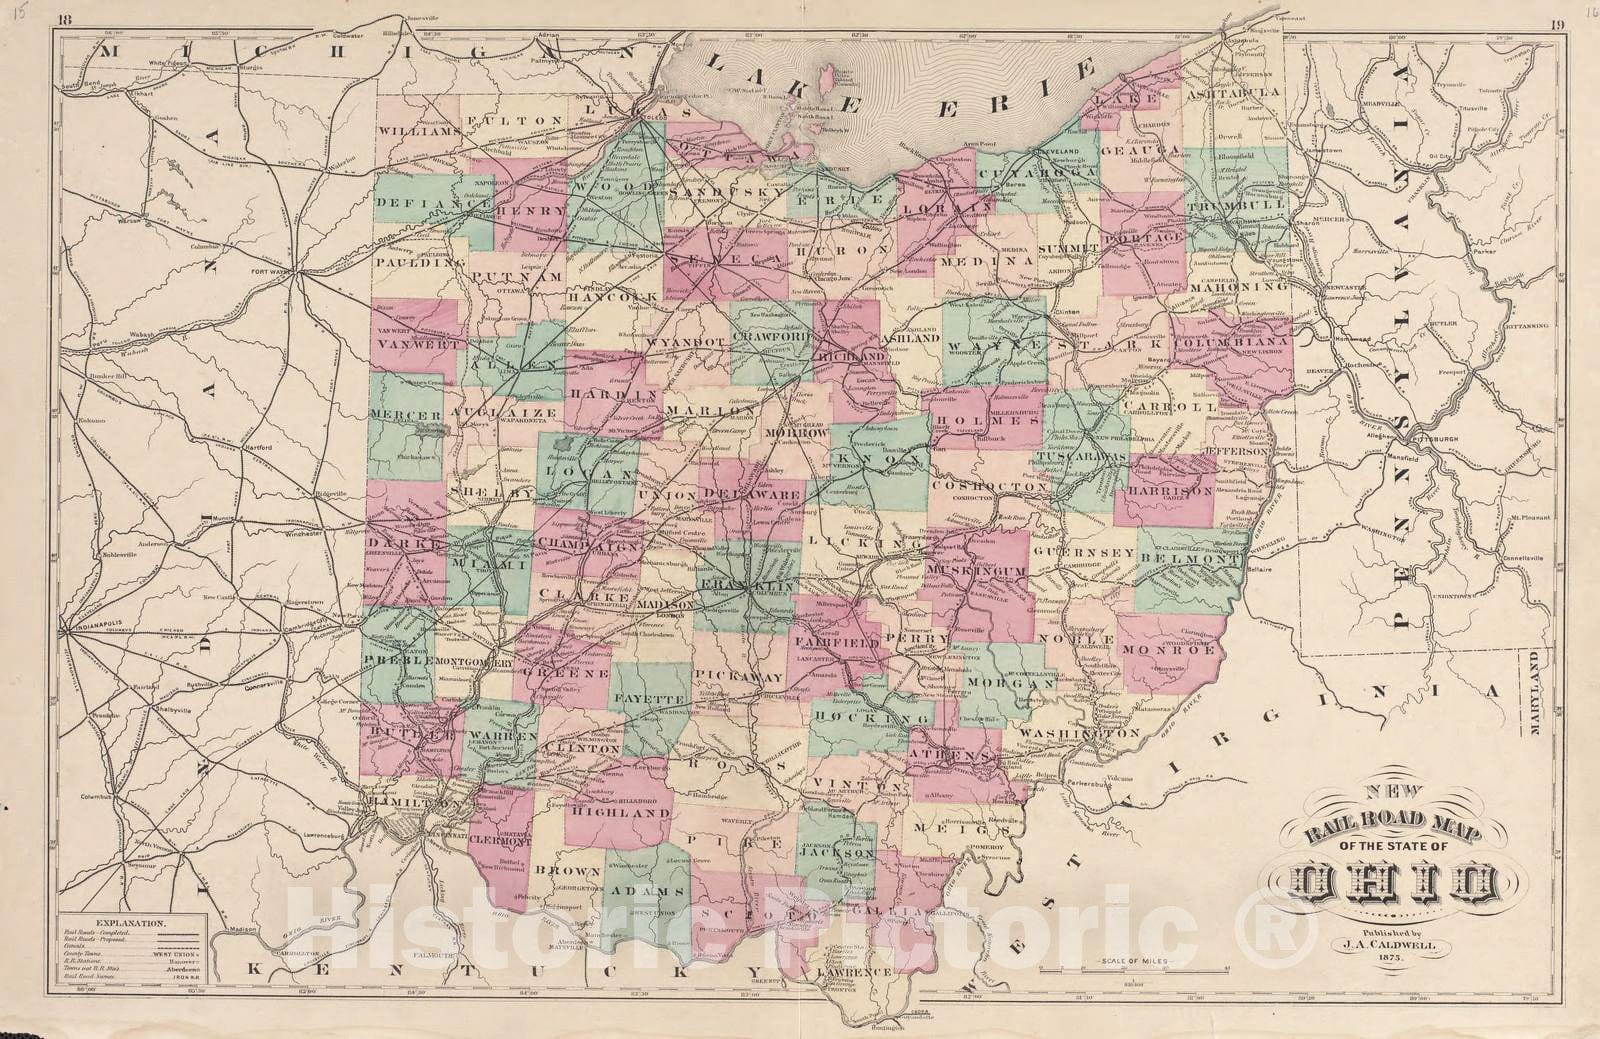 Historic 1875 Map - Caldwell's Atlas of Madison Co, Ohio - Railroad map of The State of Ohio - Caldwell's Atlas of Madison County, Ohio